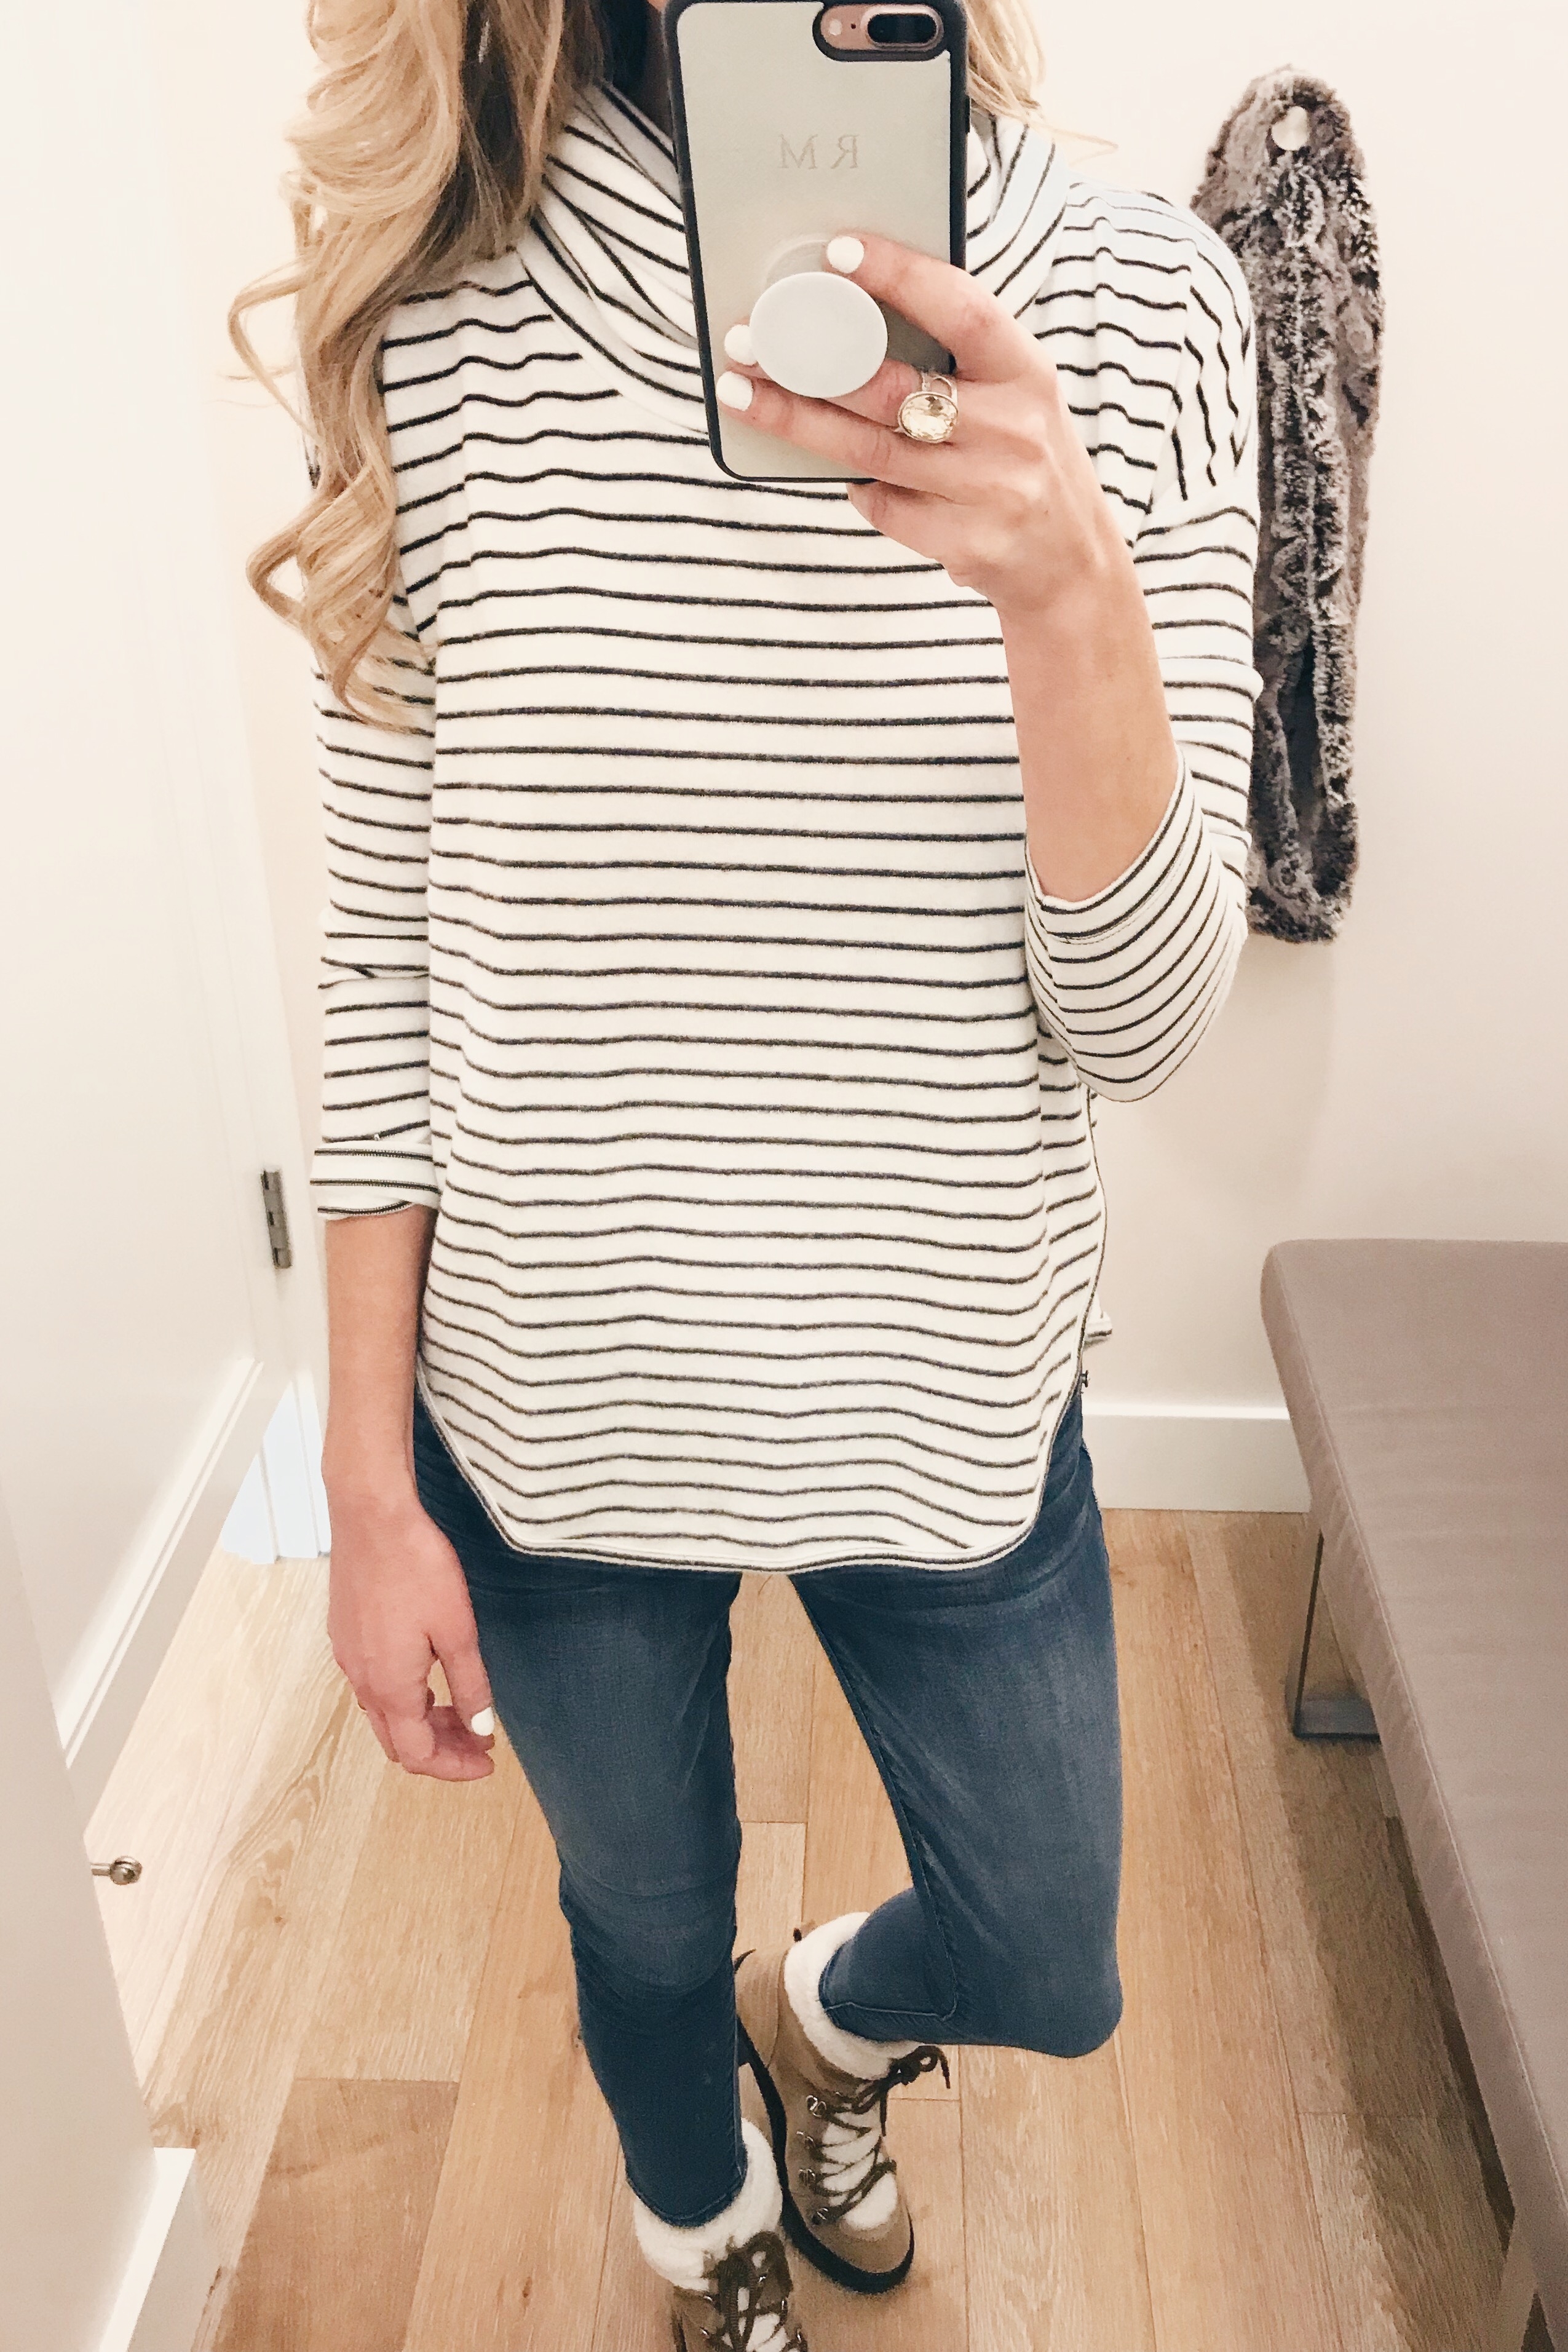 veteran's day weekend sale round up 2018 cozy striped cowl neck top 